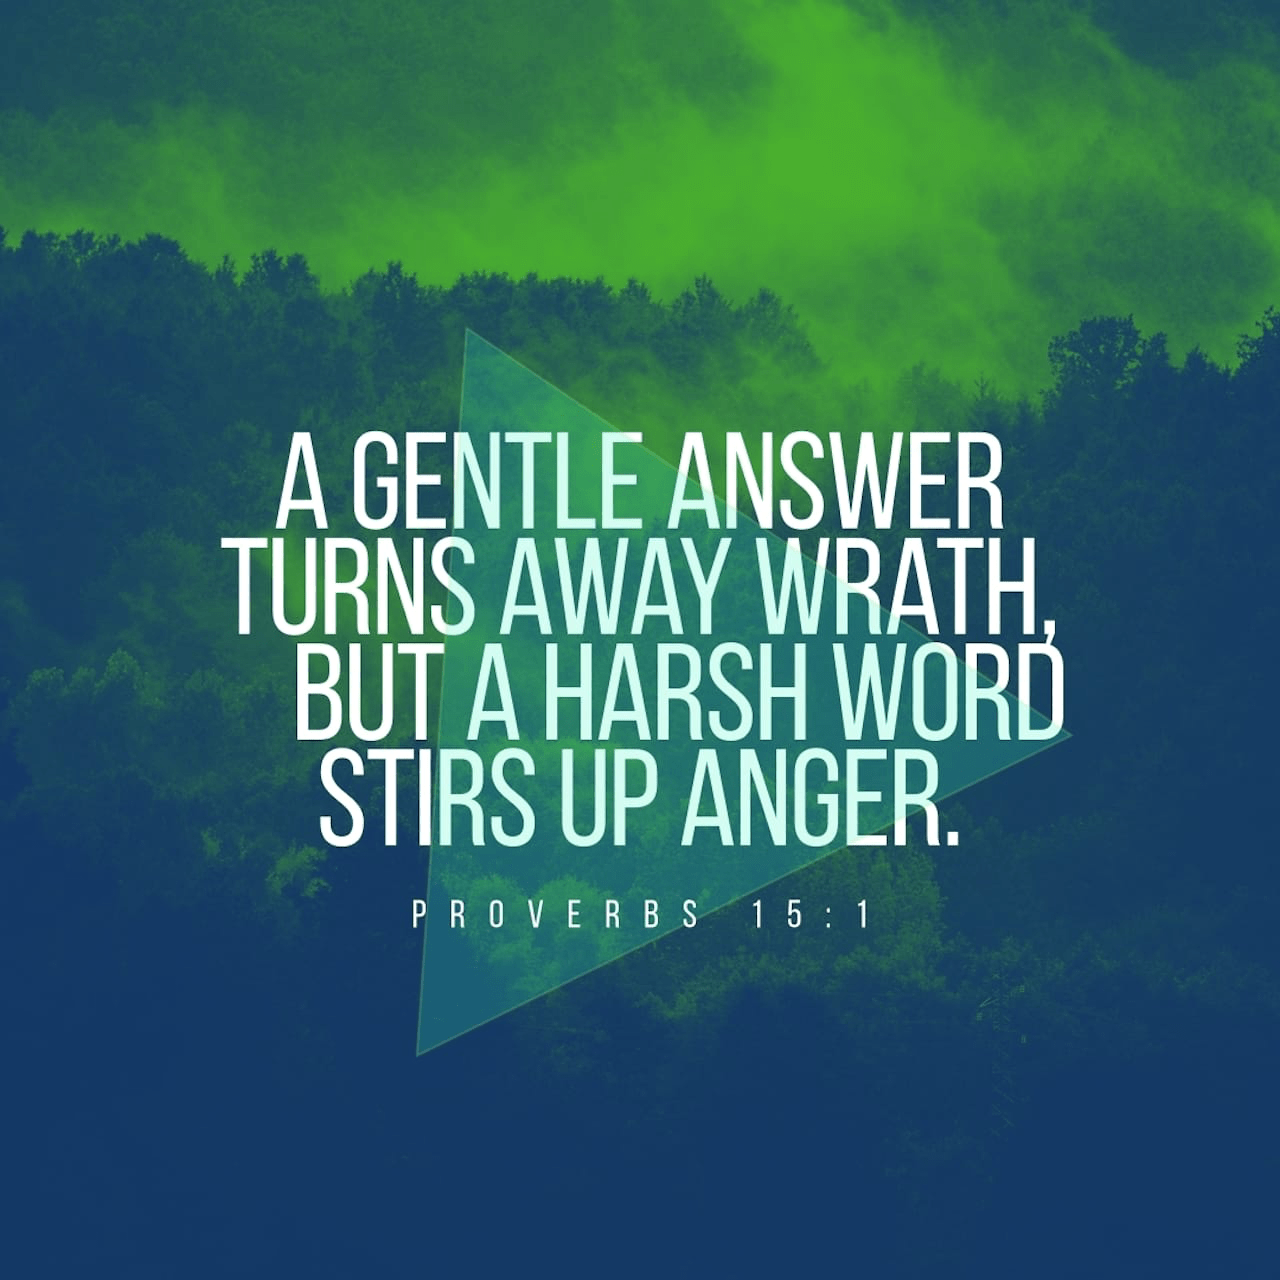 VOTD December 30 - “A gentle answer turns away wrath, But a harsh word stirs up anger.” ‭‭Proverbs‬ ‭15:1‬ ‭NASB‬‬